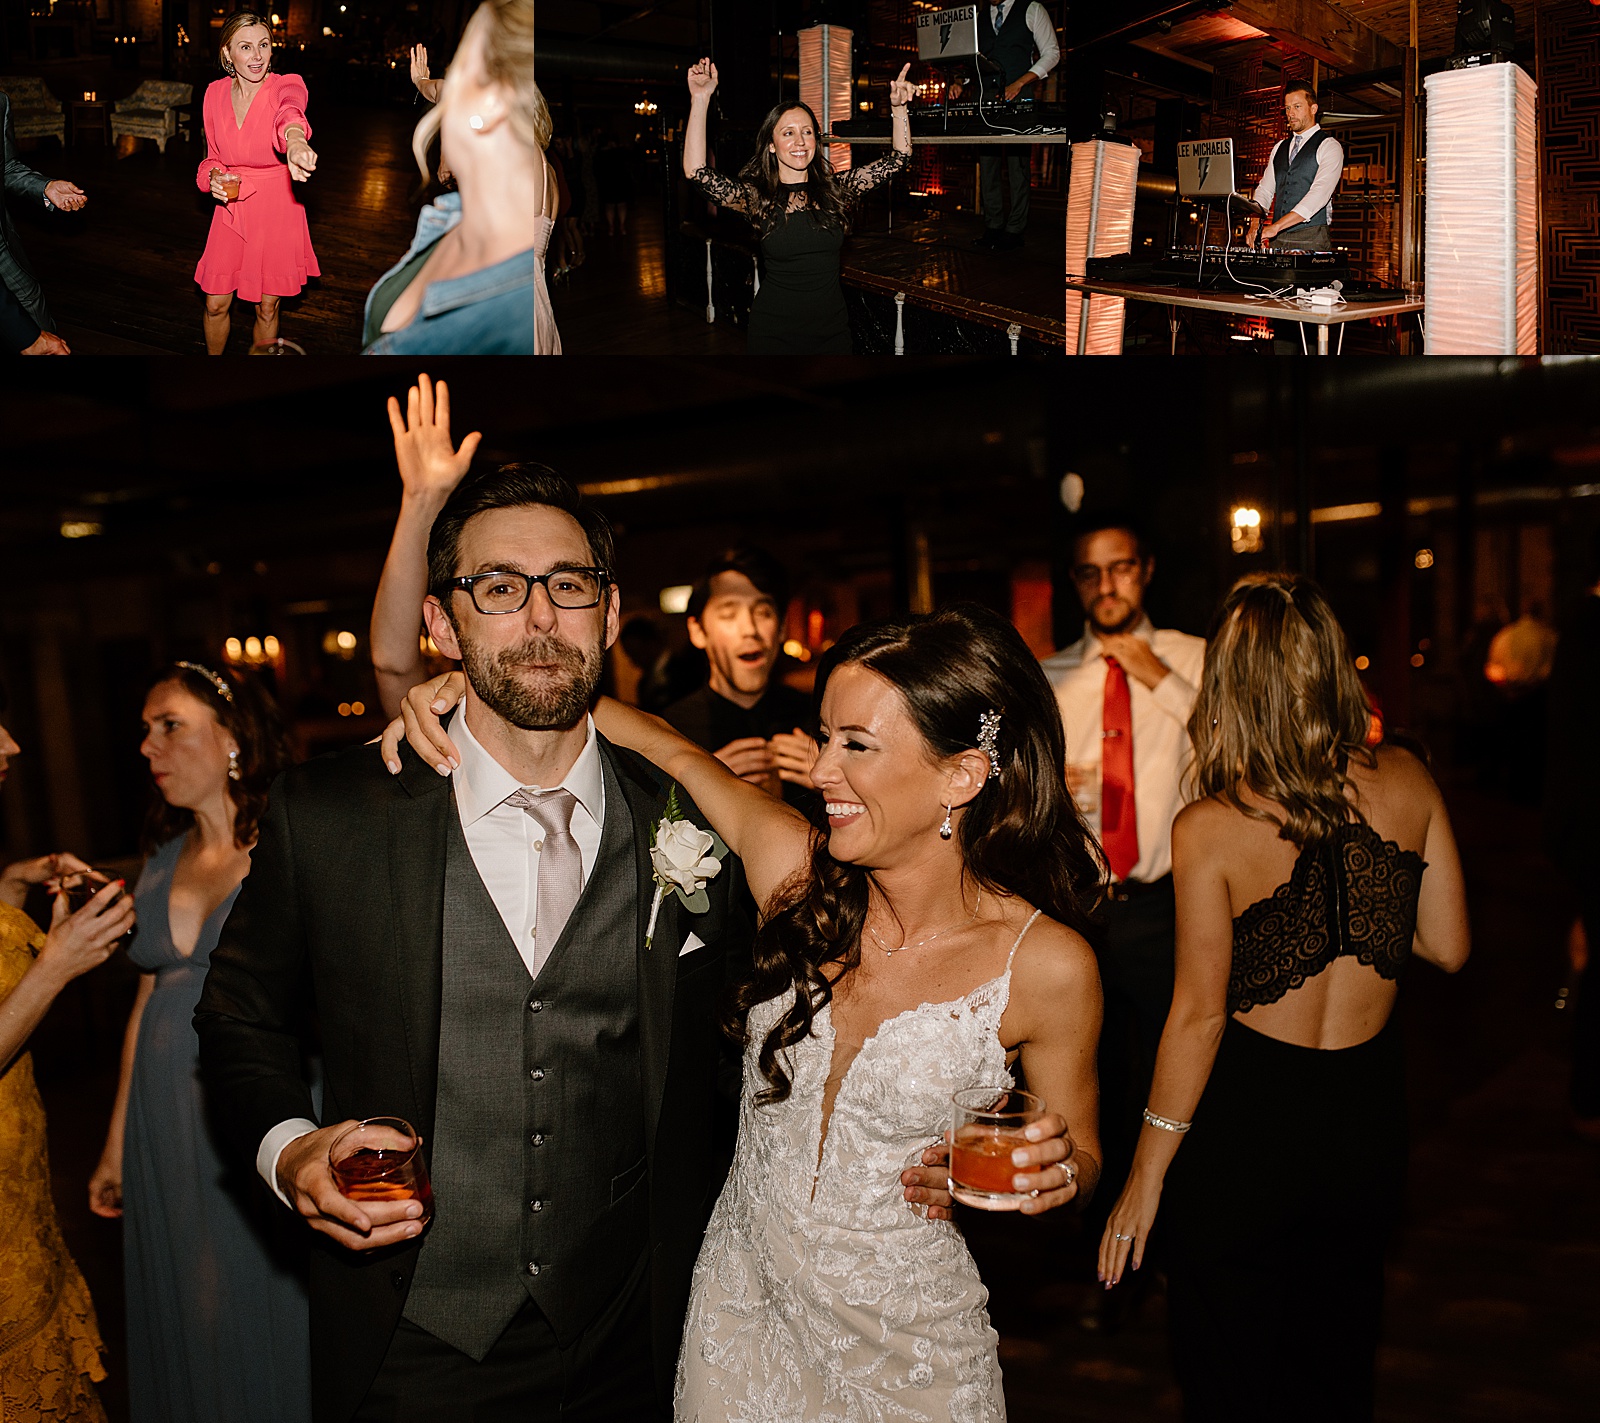 Guests dancing at a rustic wedding in Illinois by photographer Indigo Lace